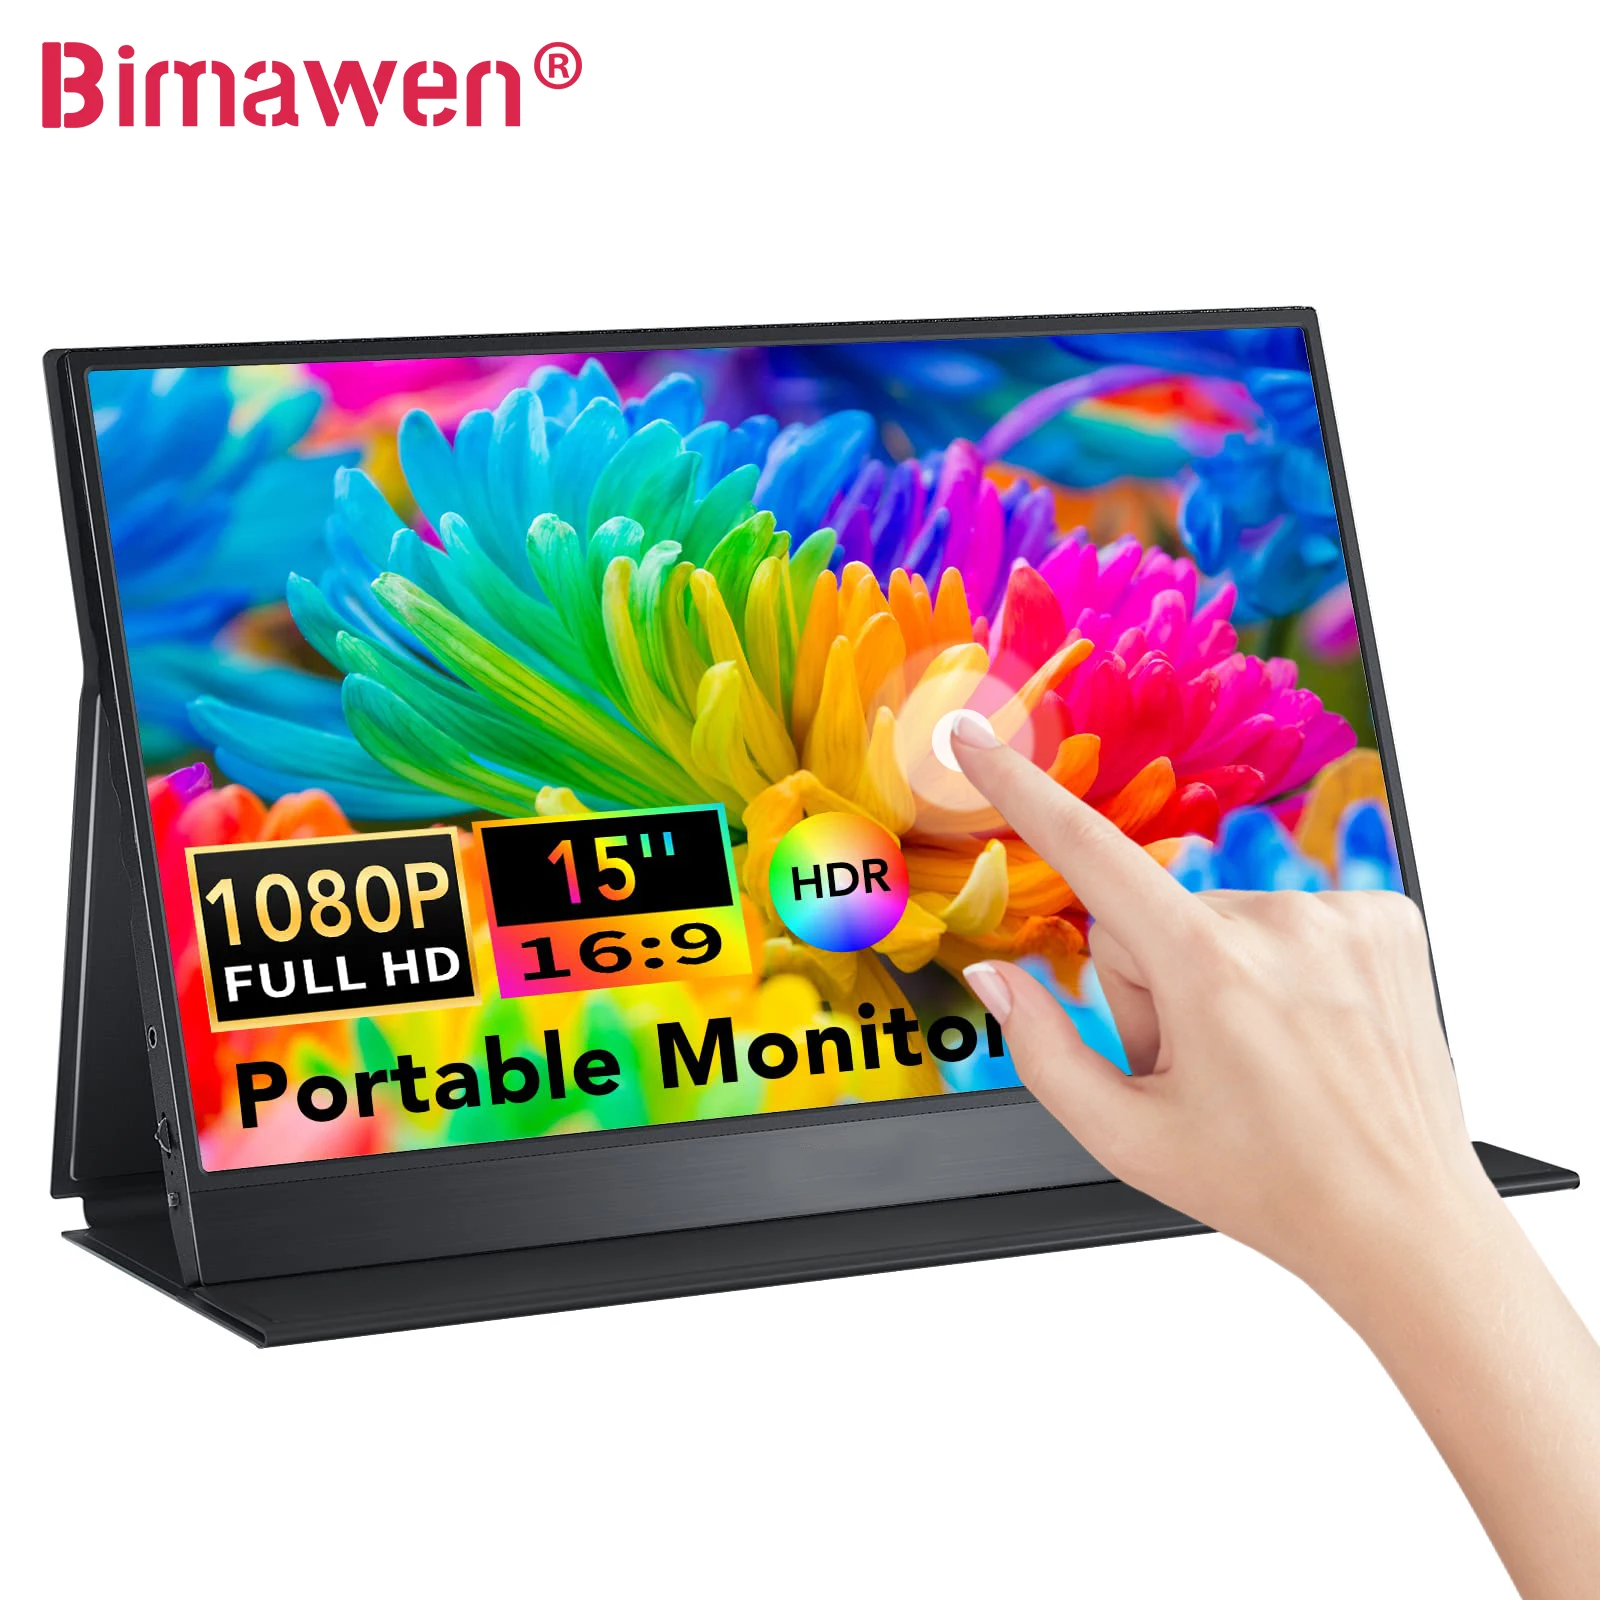 Bimawen 15.0 Inch Touchscreen Portable Monitor 1920*1080P HDR 100%sRGB Freesync Display IPS Screen For PC Laptop Xbox PS4 Switch